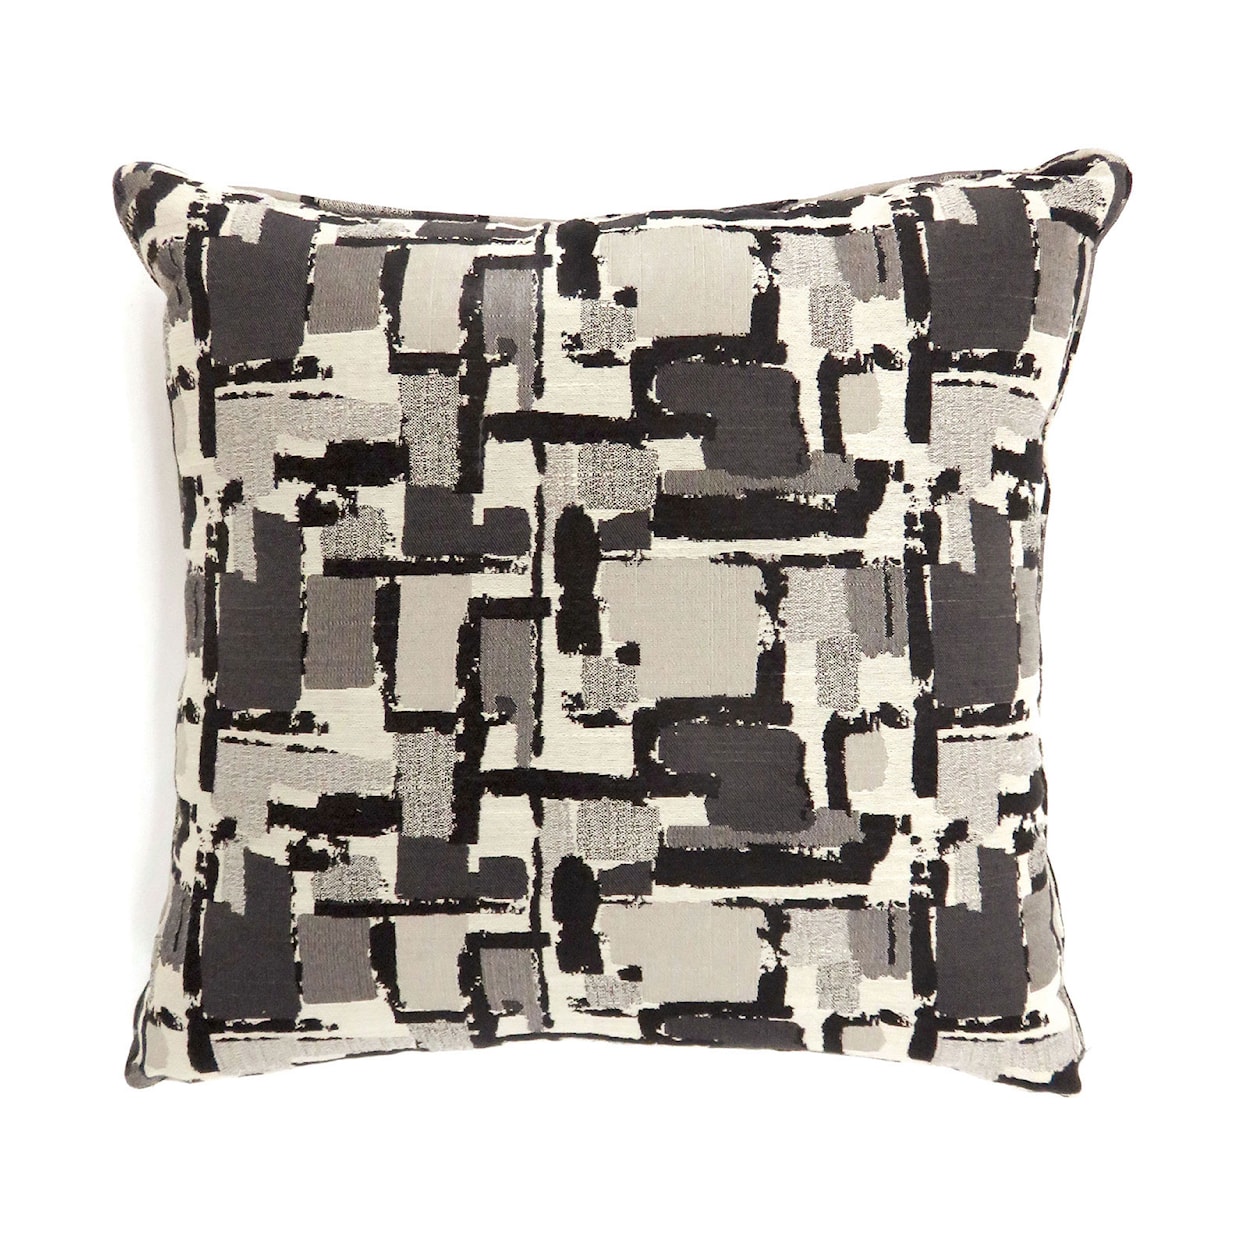 Furniture of America Concrit Set of Two 22" X 22" Pillows, Black